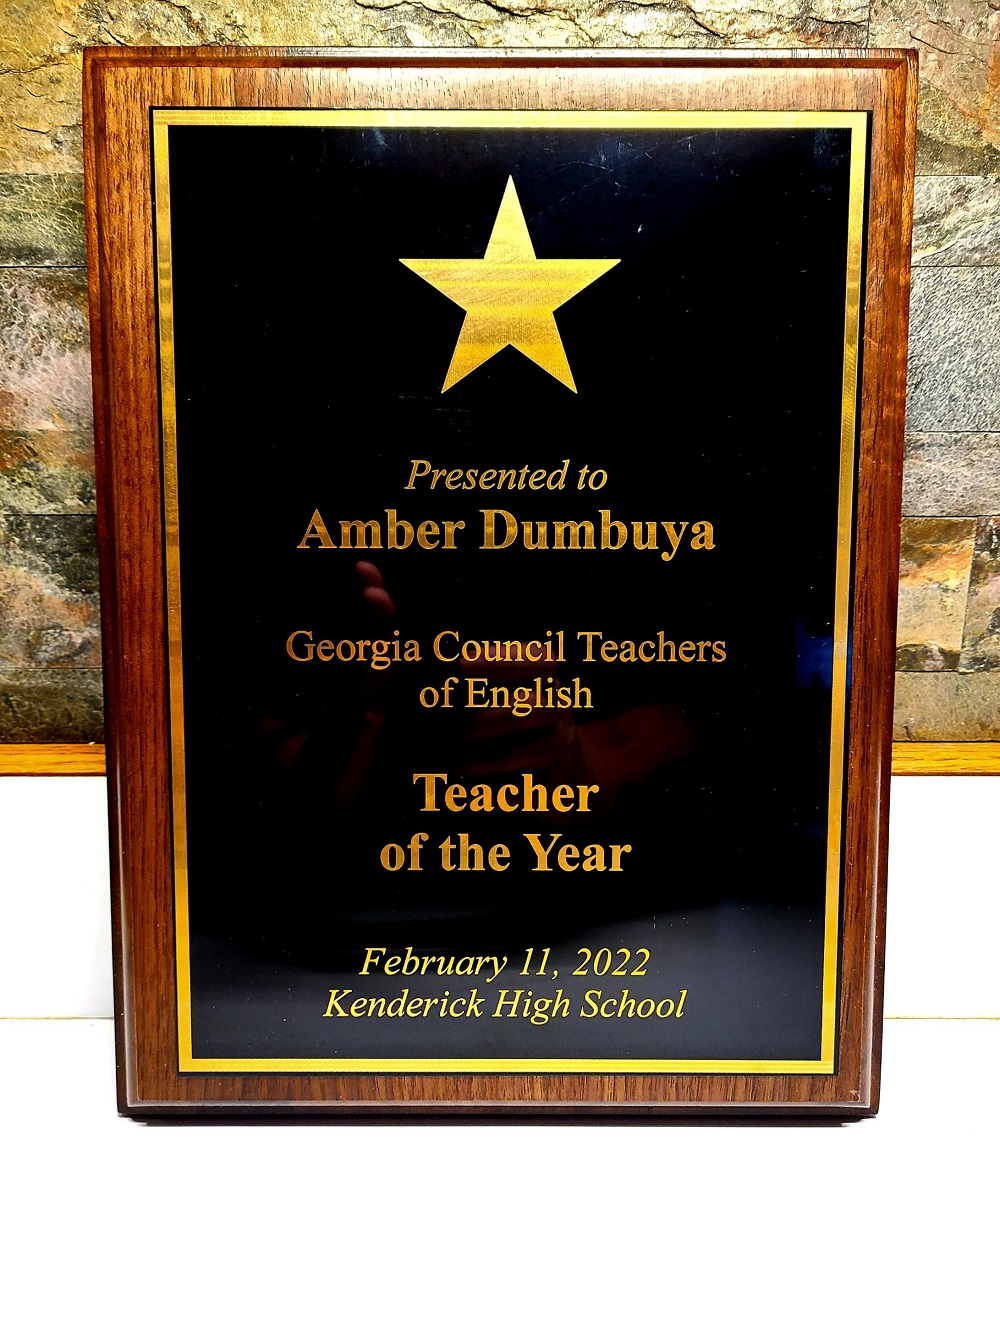 plaque awarded to Amber Dumbuya